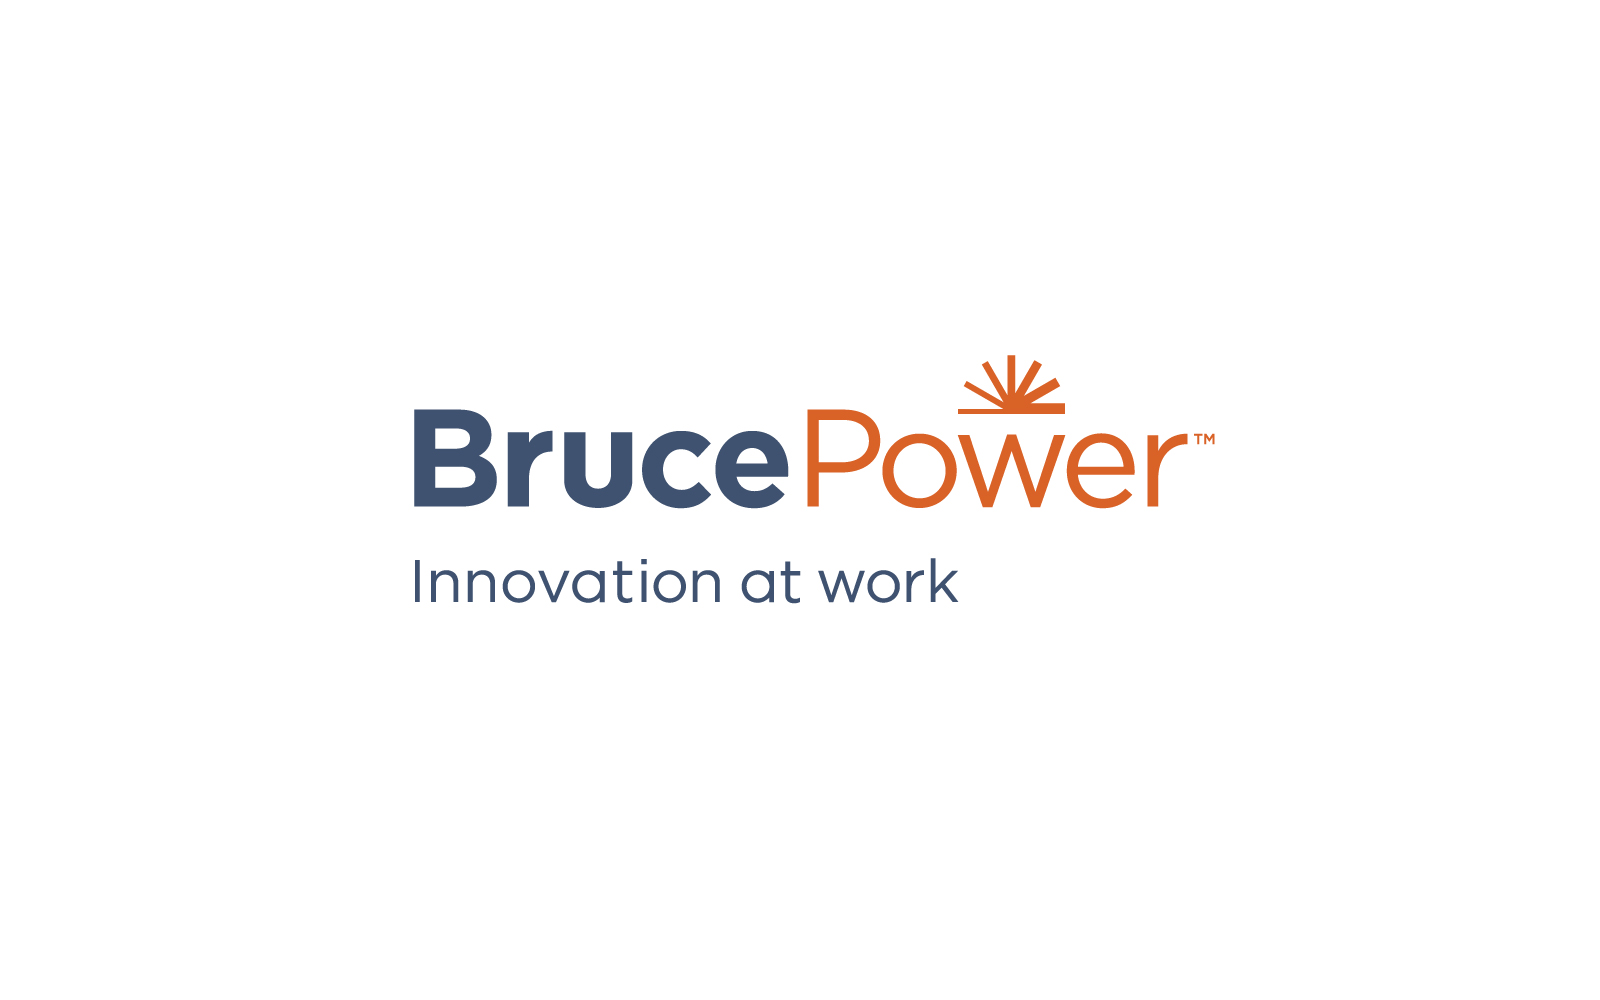 Bruce Power is asking staff who can work from home to do so